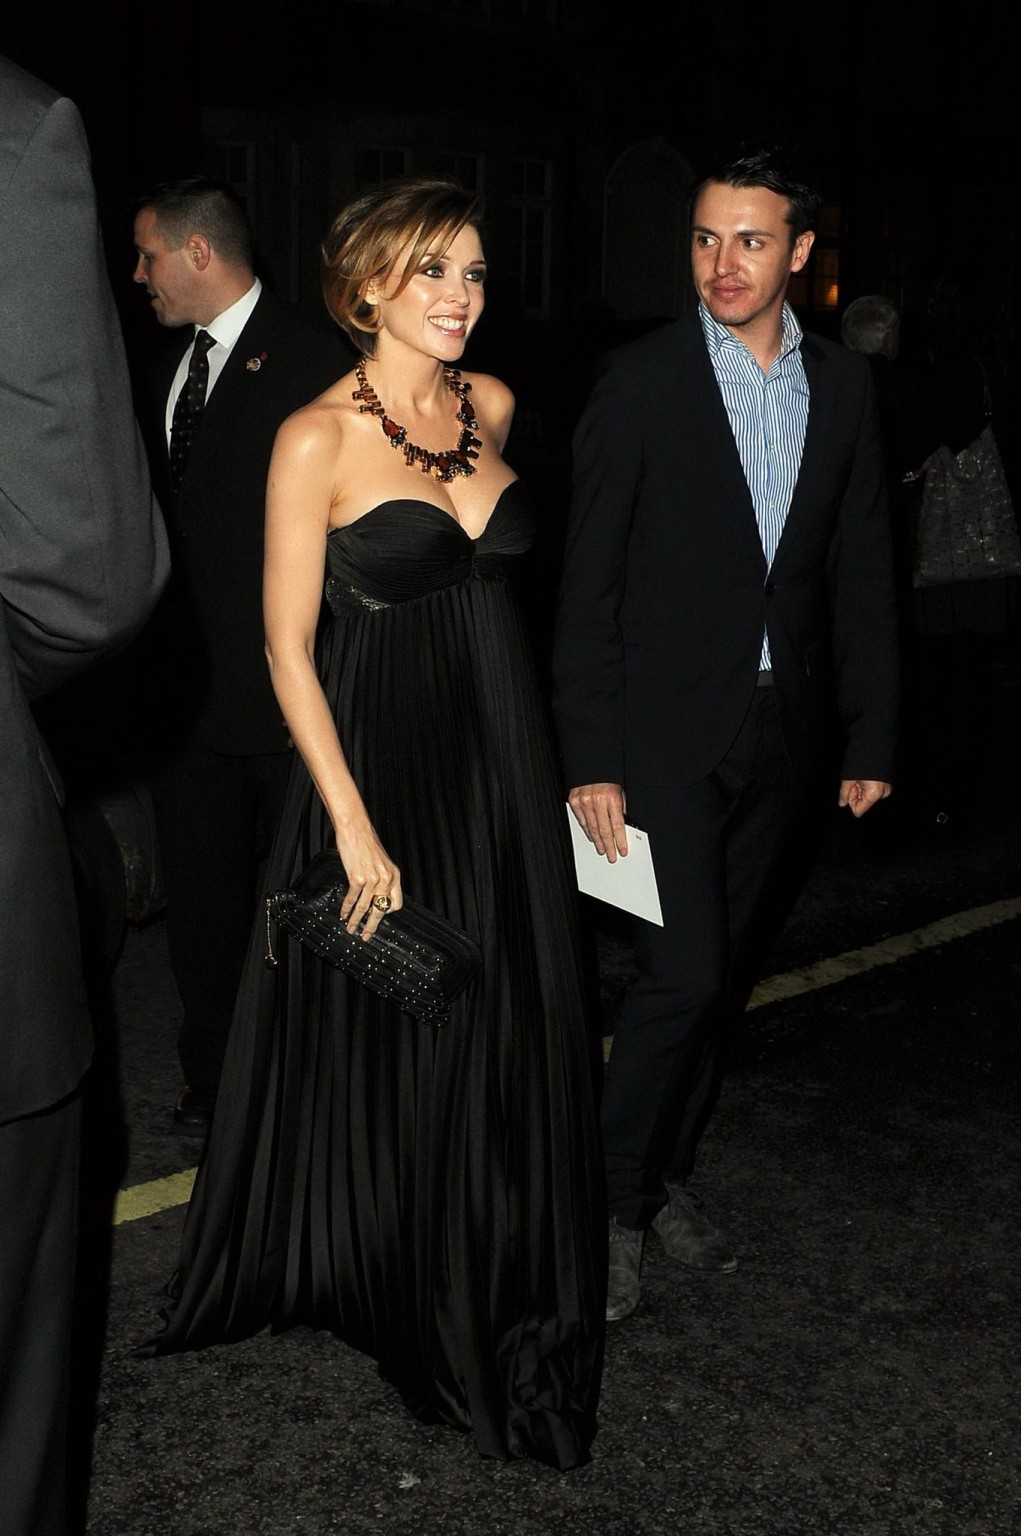 Dannii Minogue showing huge cleavage in a strapless black dress at the 'Pride of #75326996